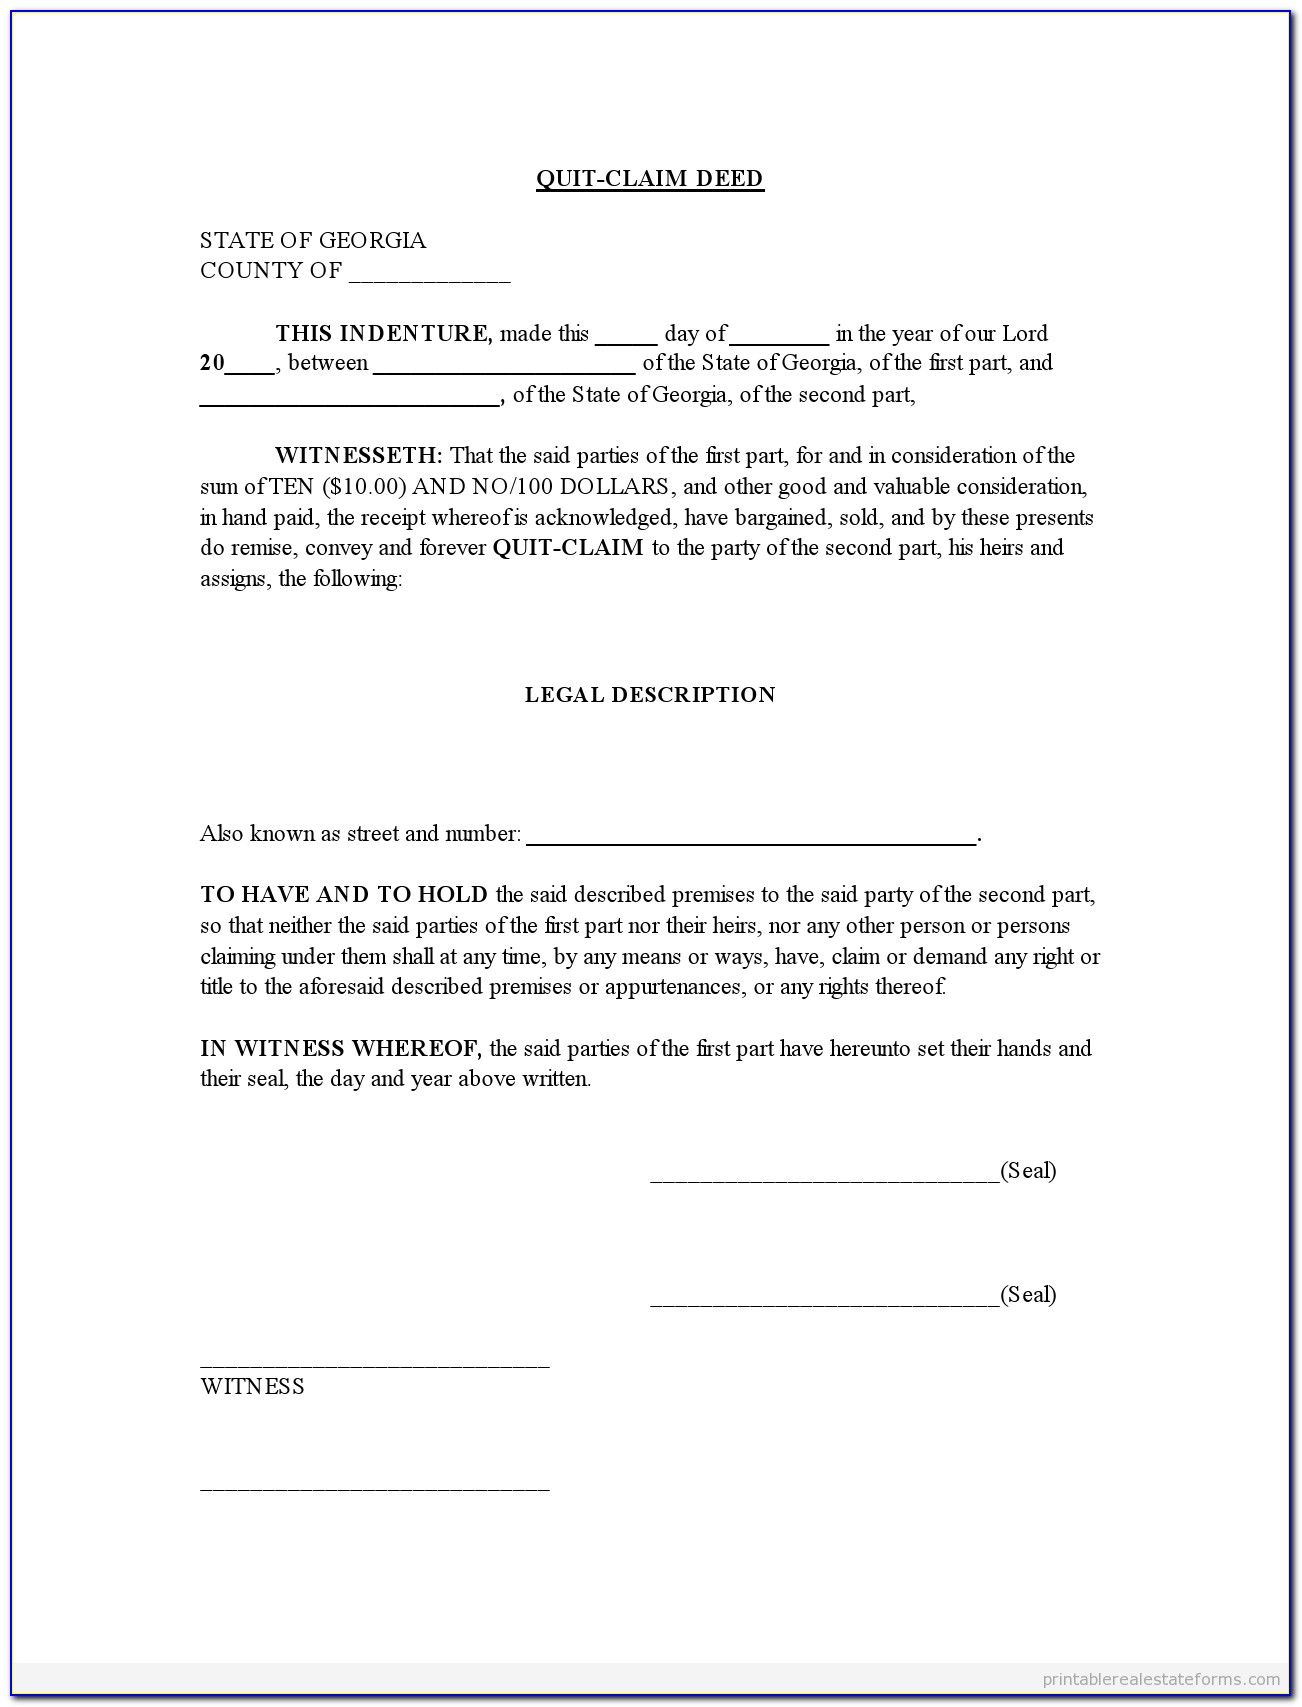 How To Fill In A Quit Claim Deed Form